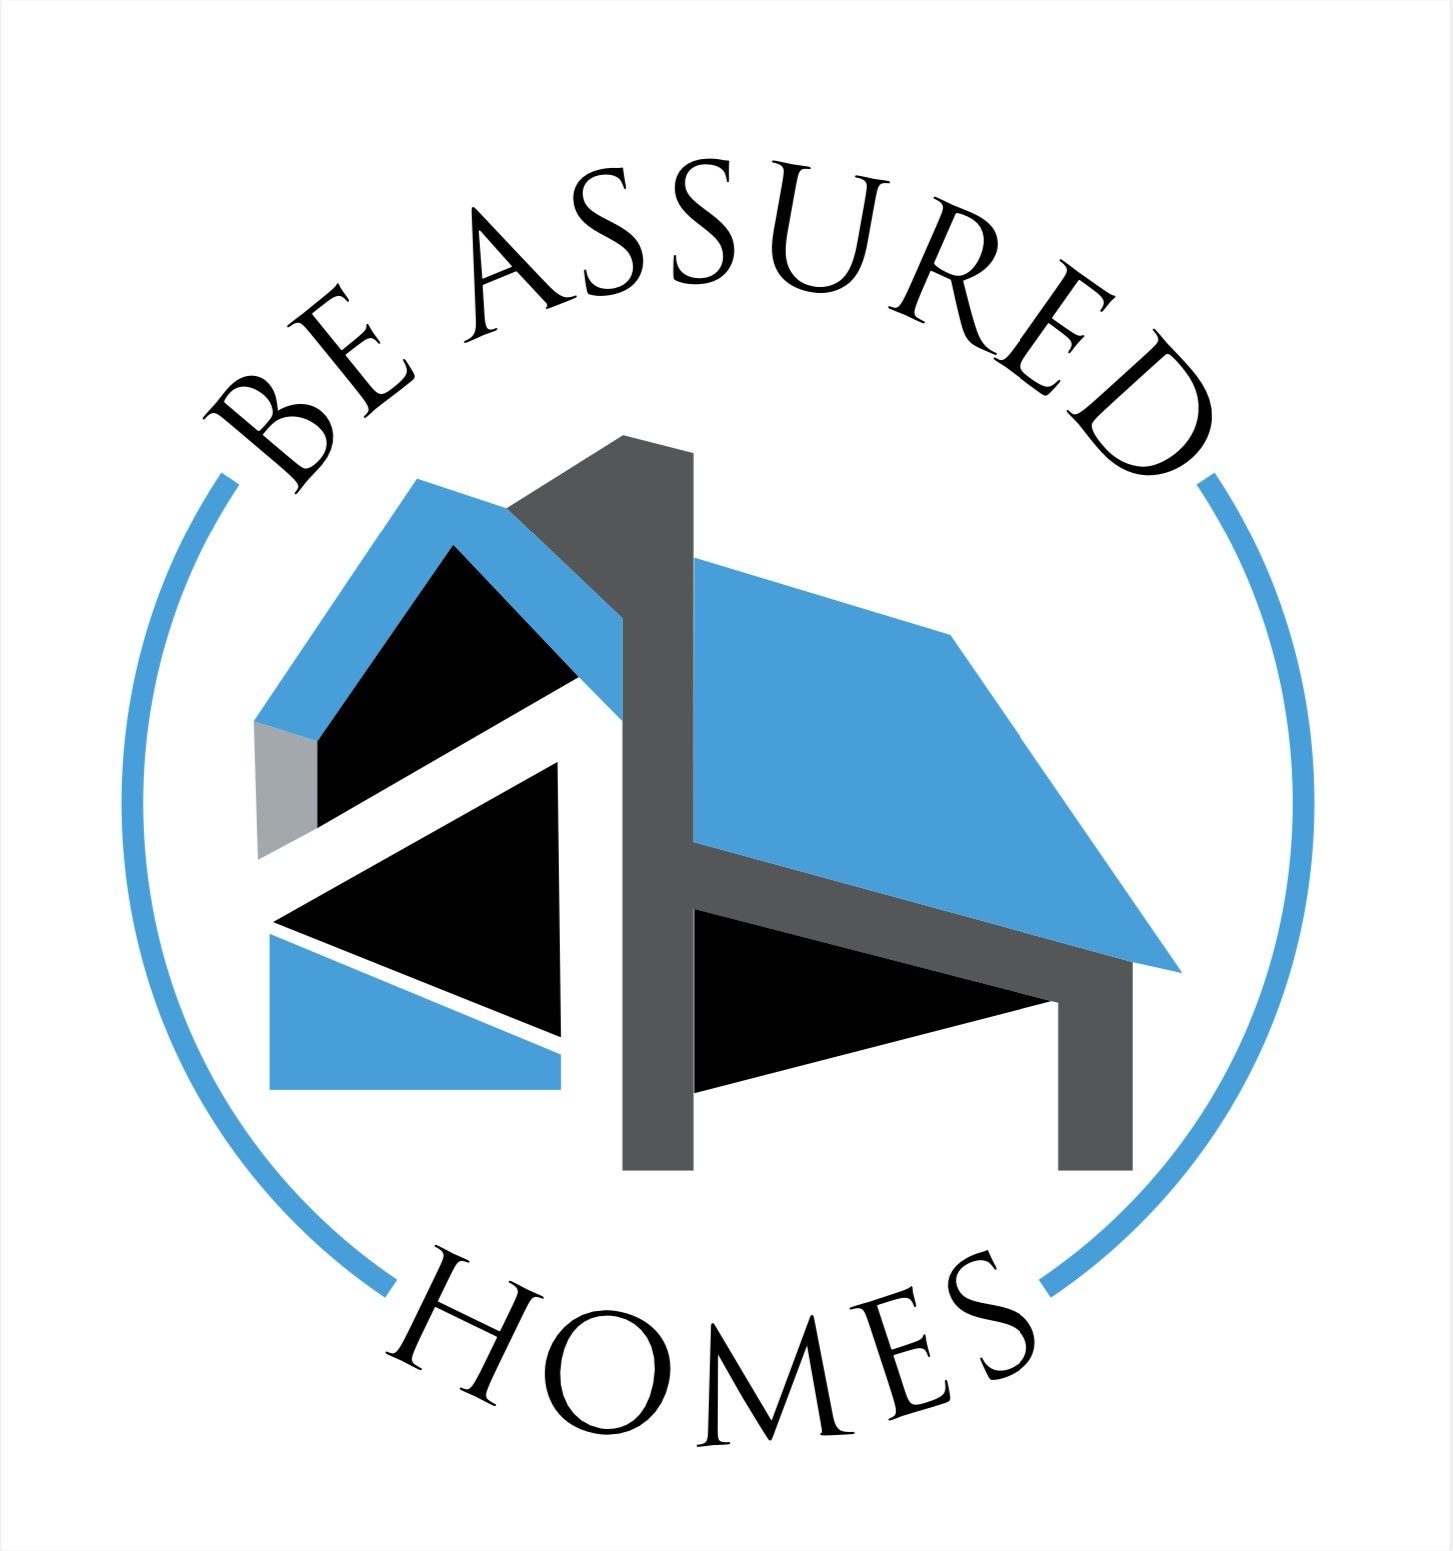 Be Assured Homes